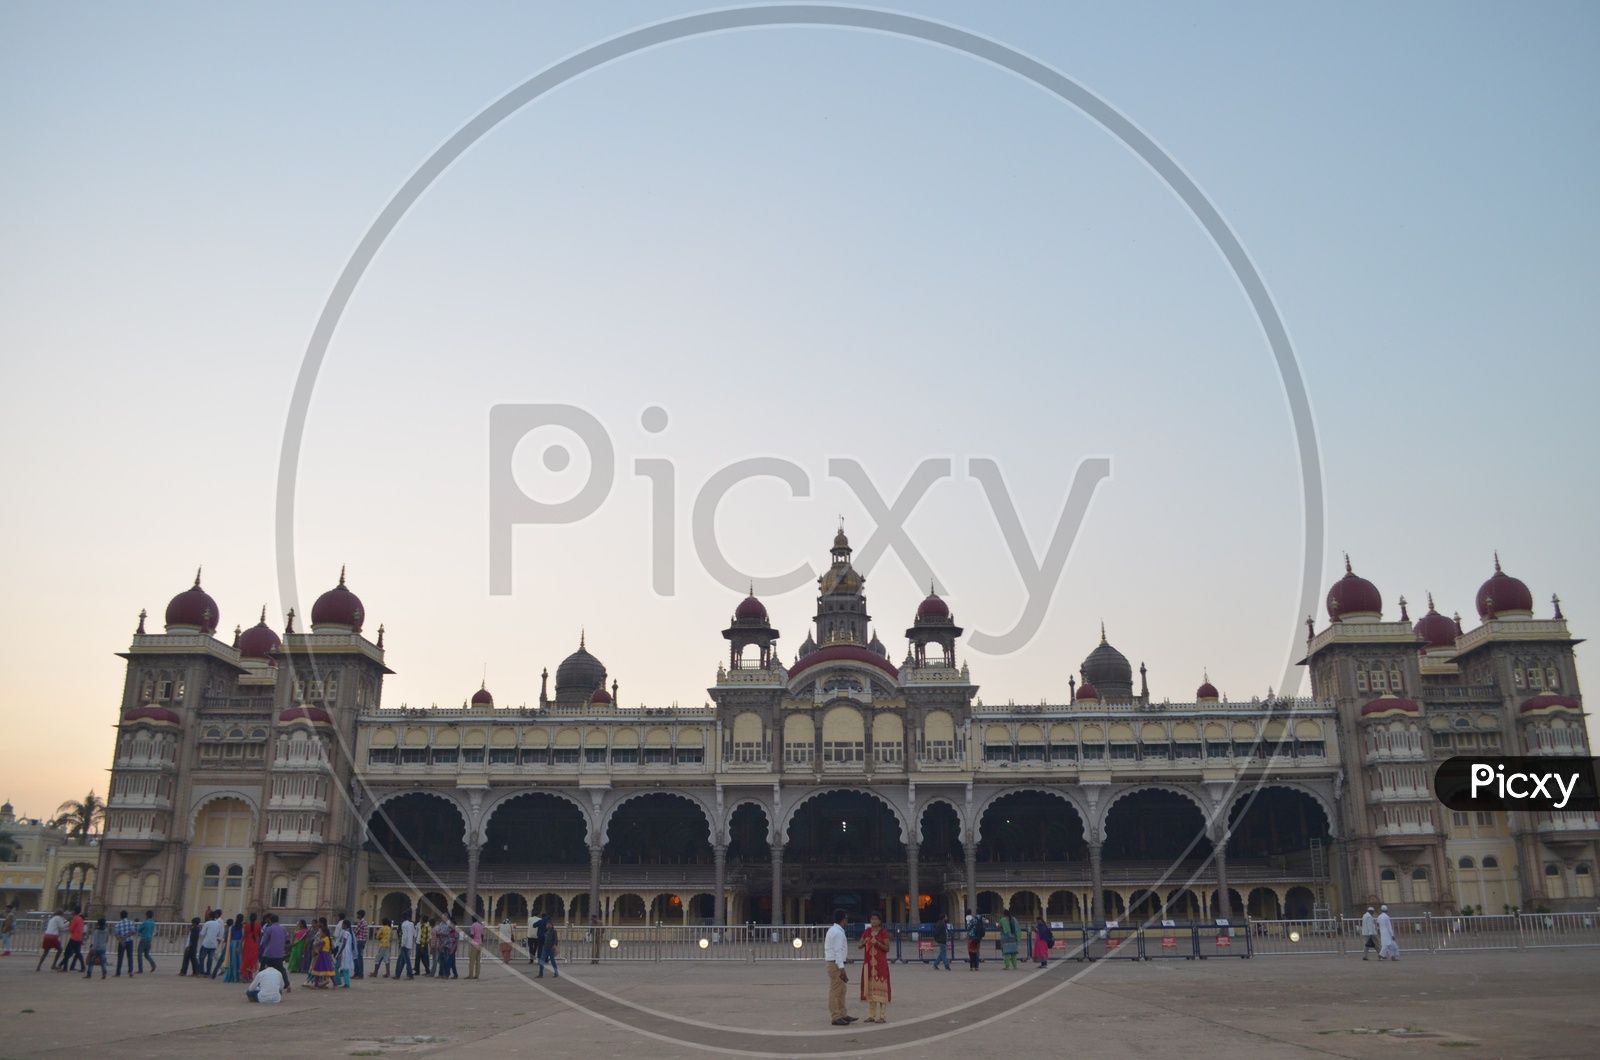 Mysore Palace front view